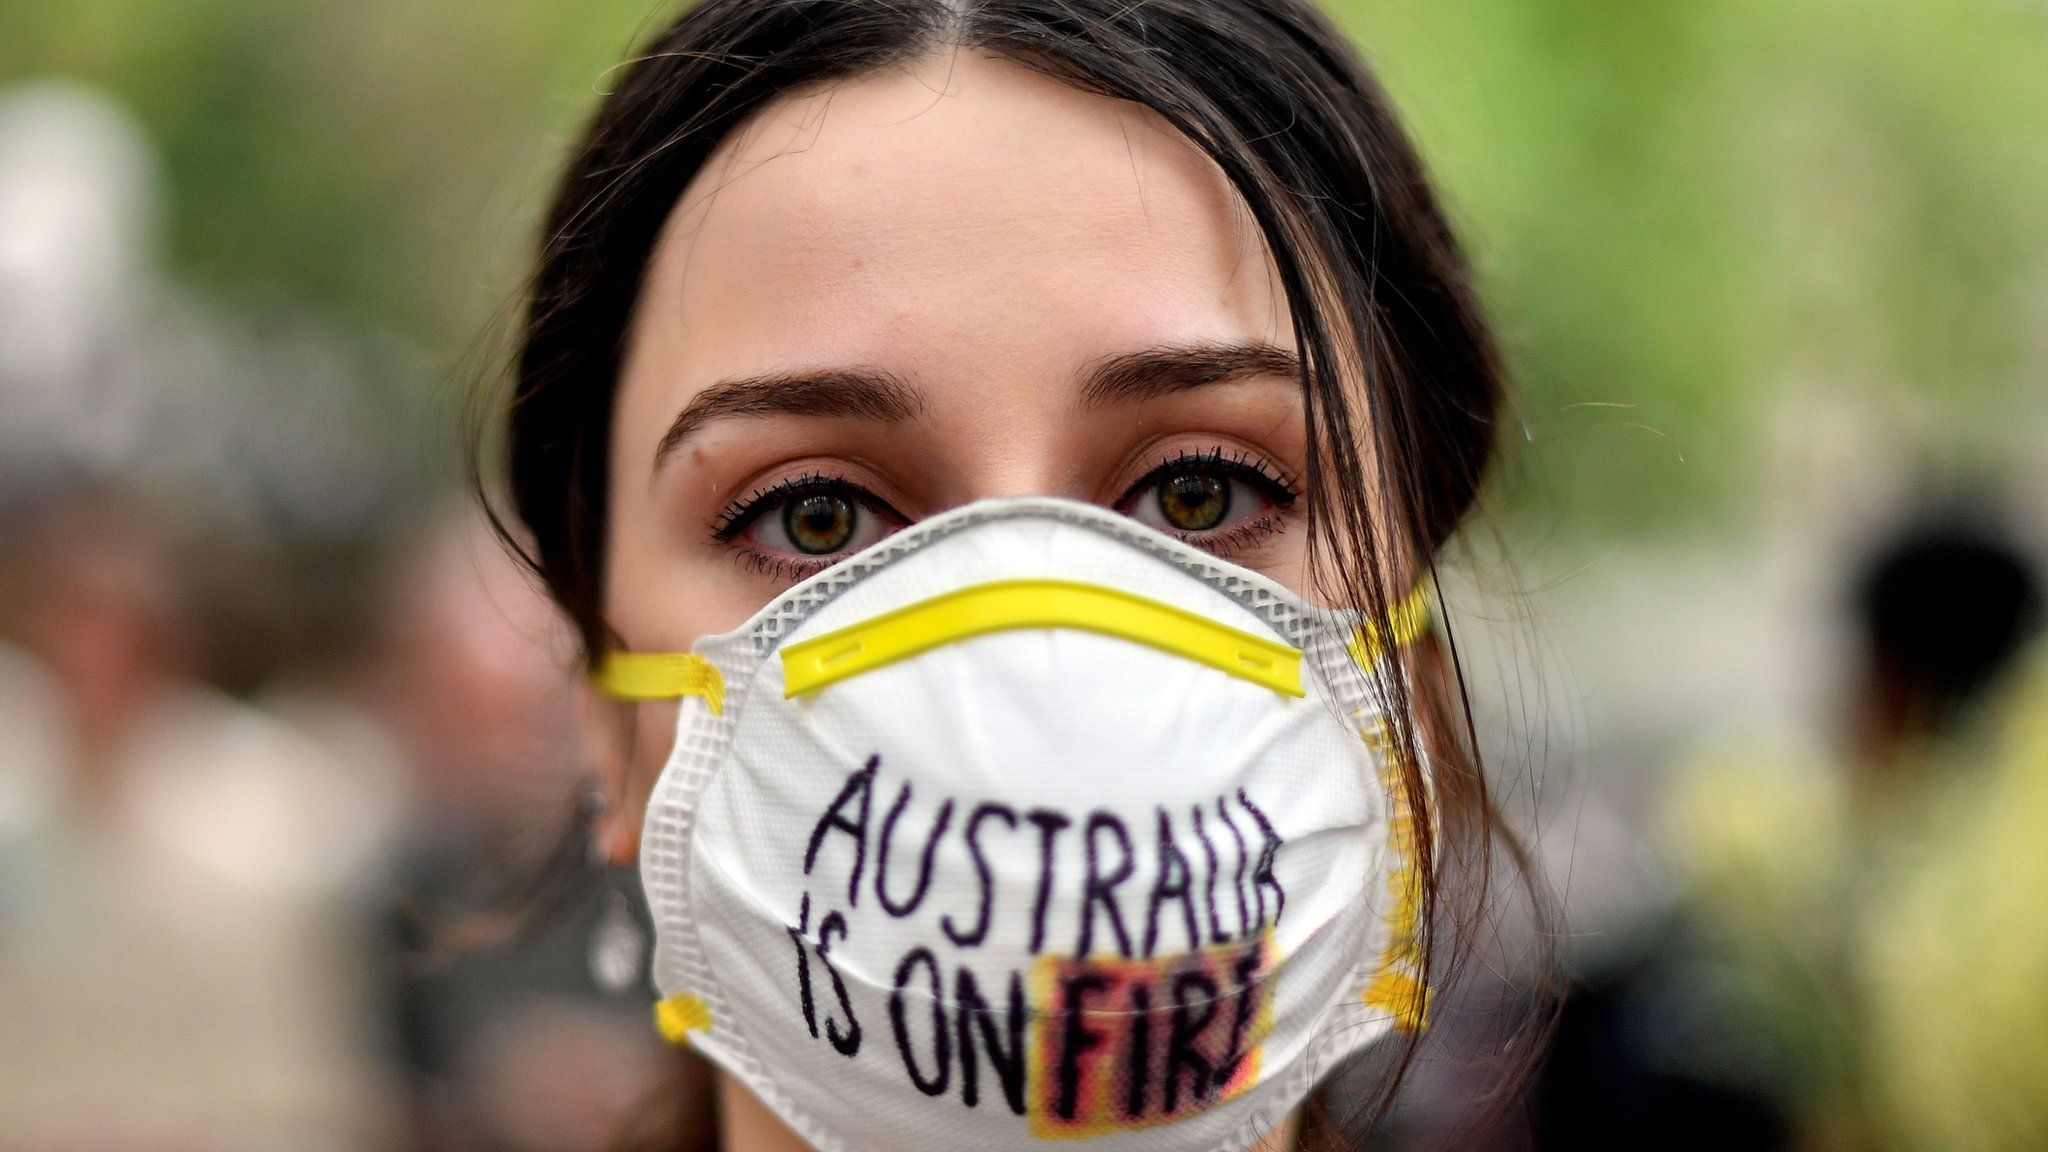 A demonstrator wearing a mask attends a climate protest rally in Sydney on December 11, 2019.